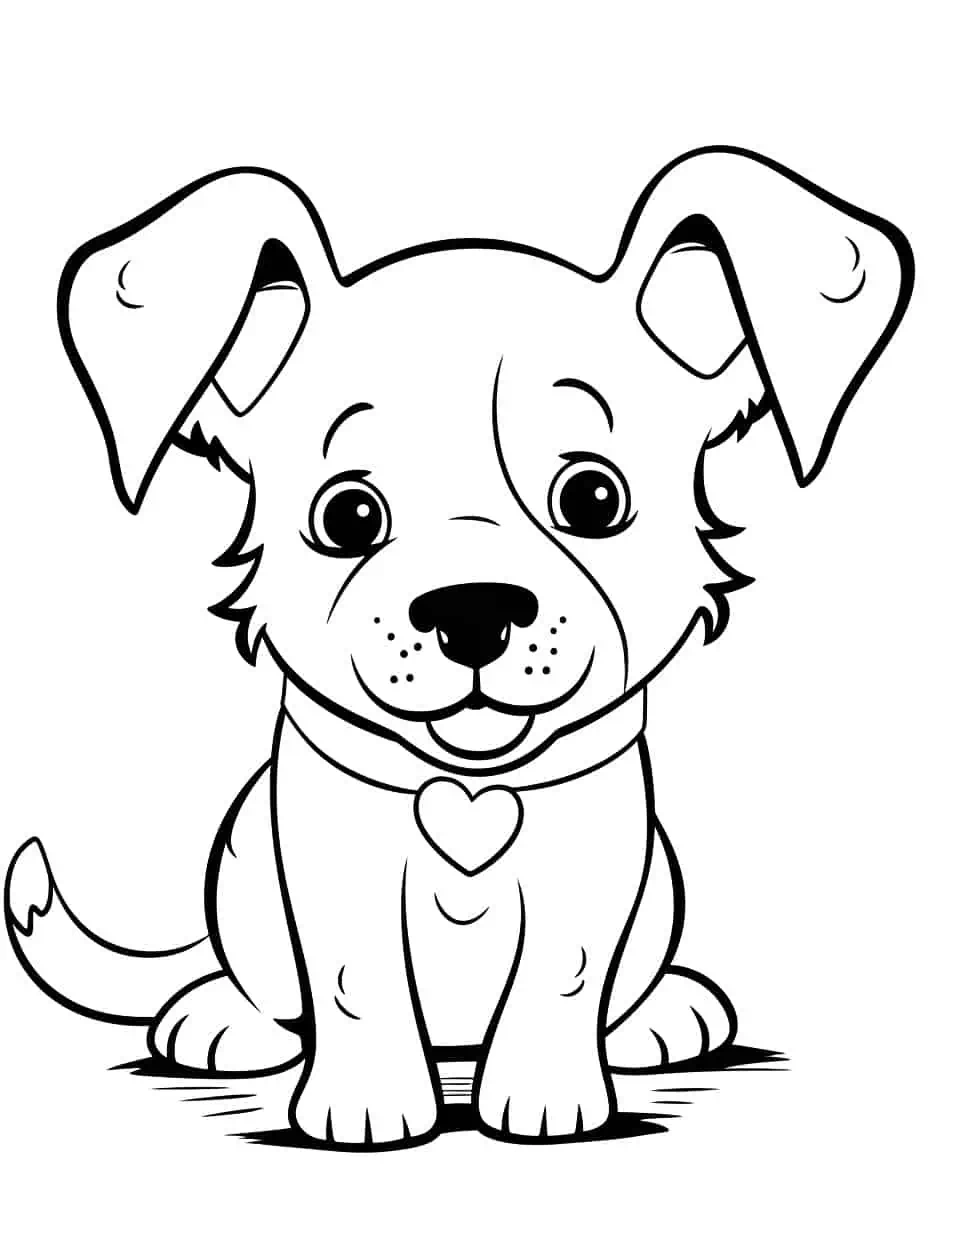 Kawaii Border Collie Dog Coloring Page - A cute and cuddly Border Collie in Kawaii style.